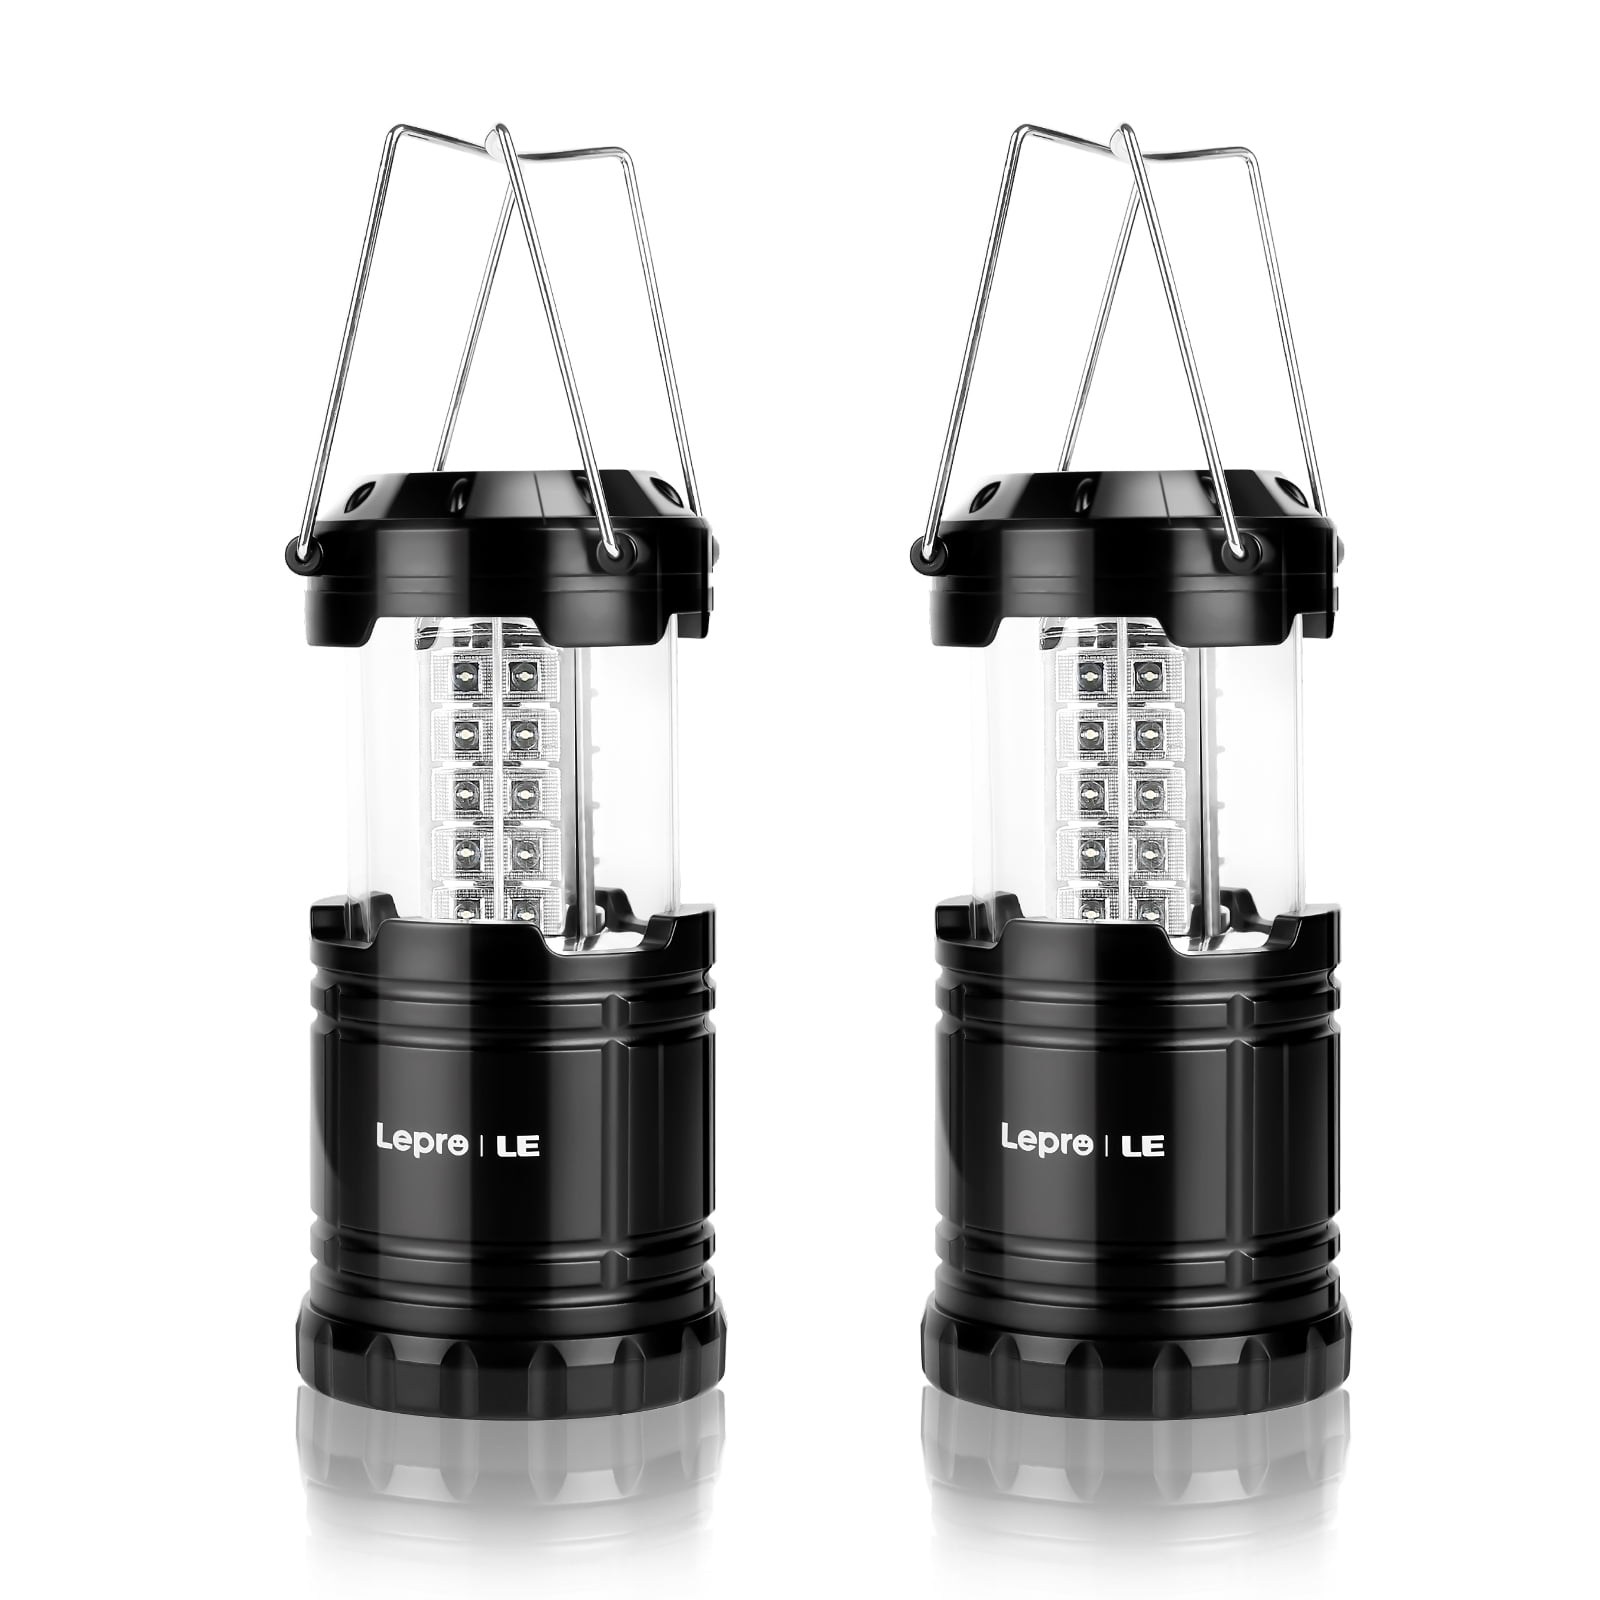 Lepro Le Portable LED Camping Lantern Outdoor 30 LEDs Flashlights Ipx4 Water Resistant Lamp Battery Powered Light for Home Garden